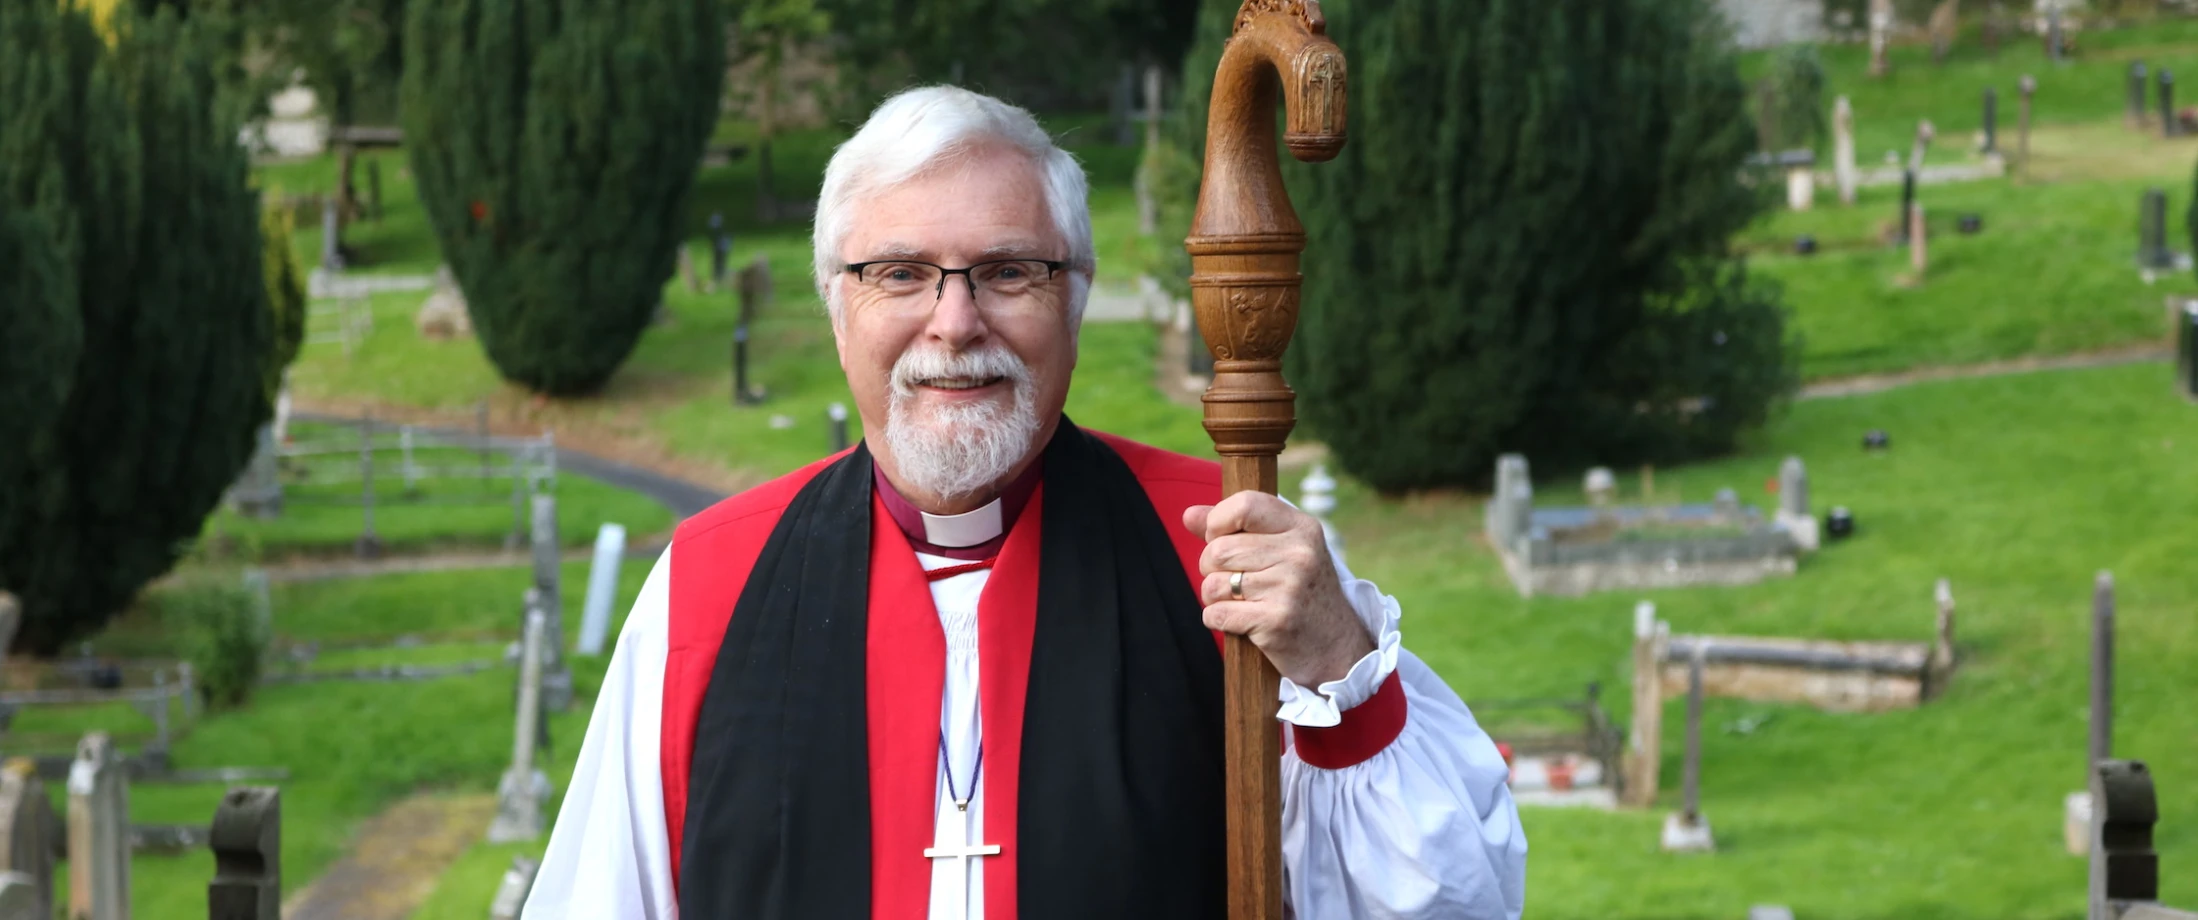 Bishop Harold says ‘Thank you” to the diocese